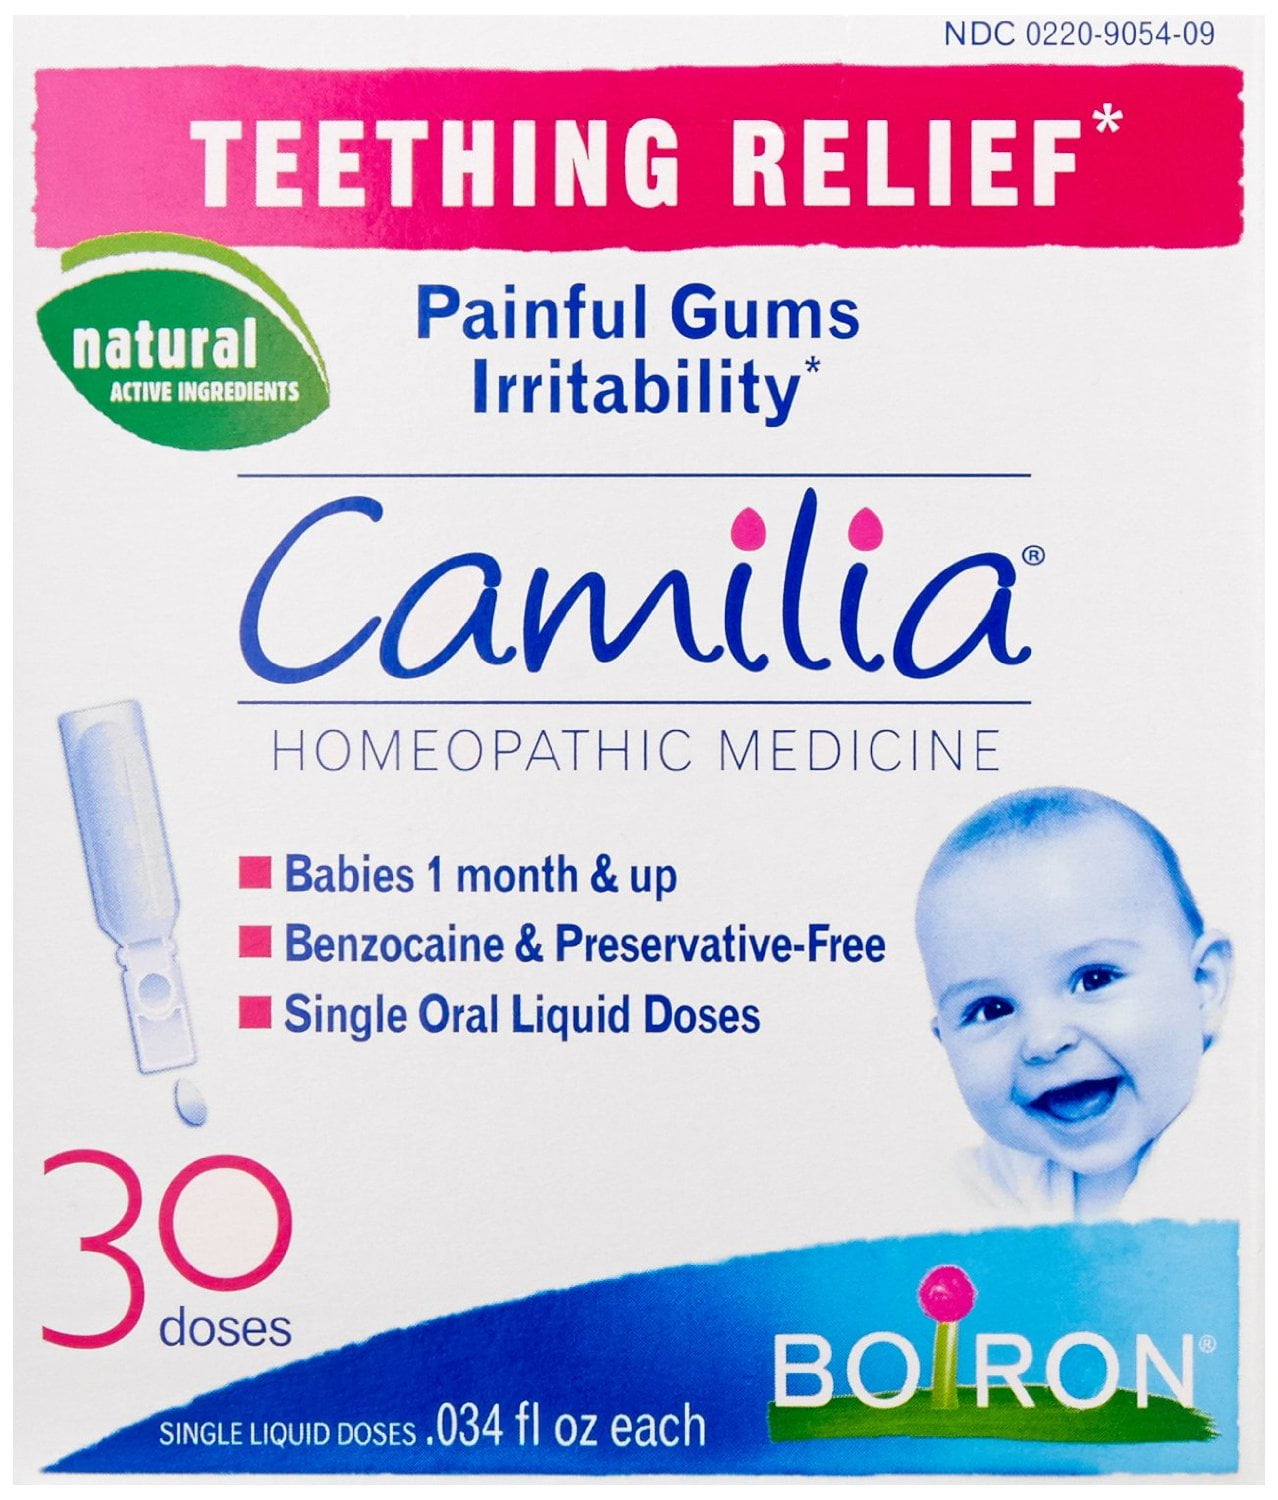 NEW BOIRON THEETHING RELIEF PAINFUL GUMS IRRITABILITY BENZOCAINE FREE BABY CARE 